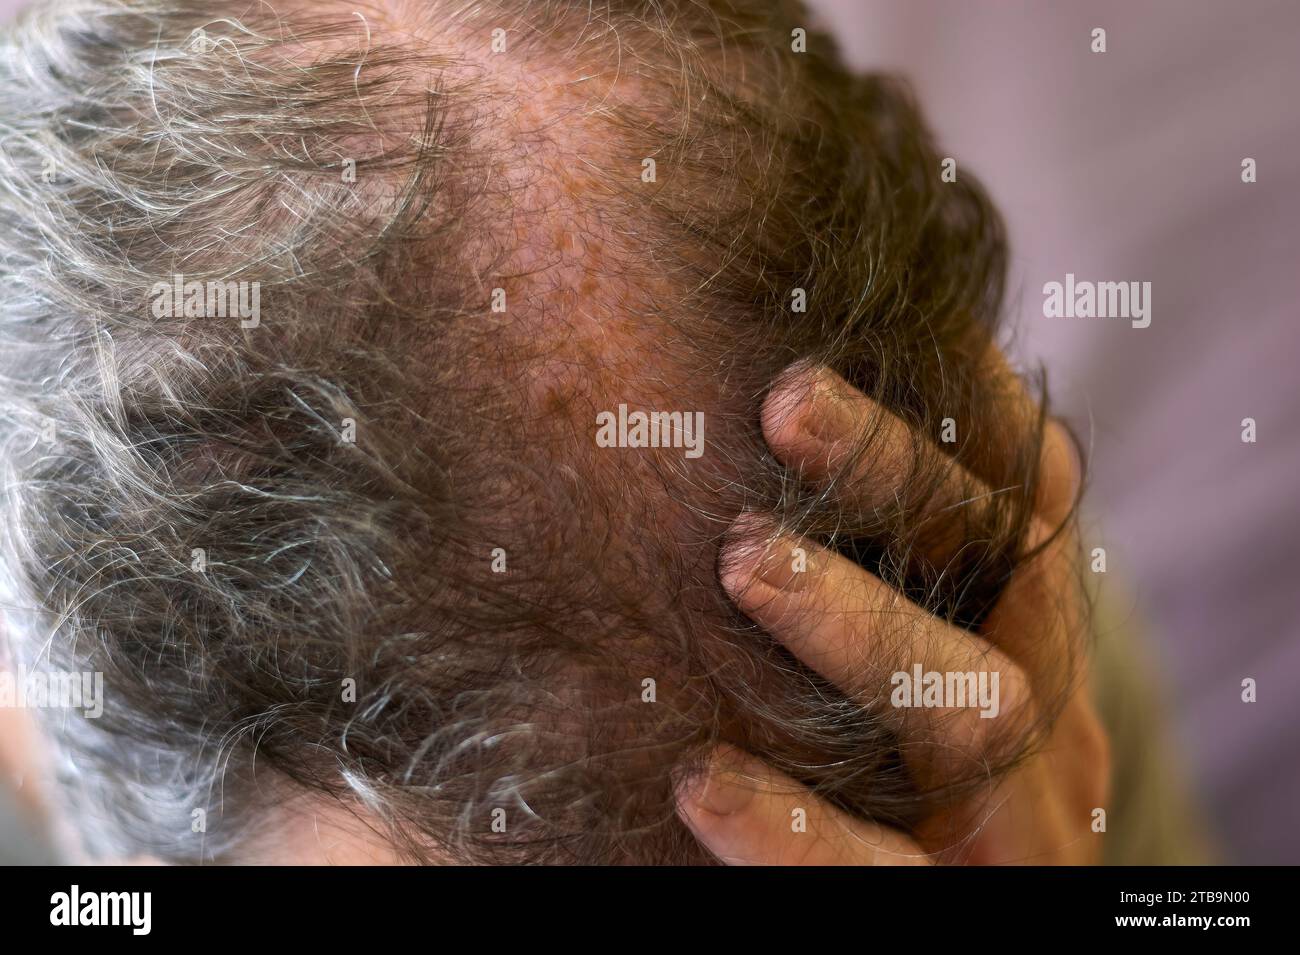 Close up of hand touching scalp with hair loss problem. 30 year old caucasian man with very thin hair worried about hair loss. Stock Photo